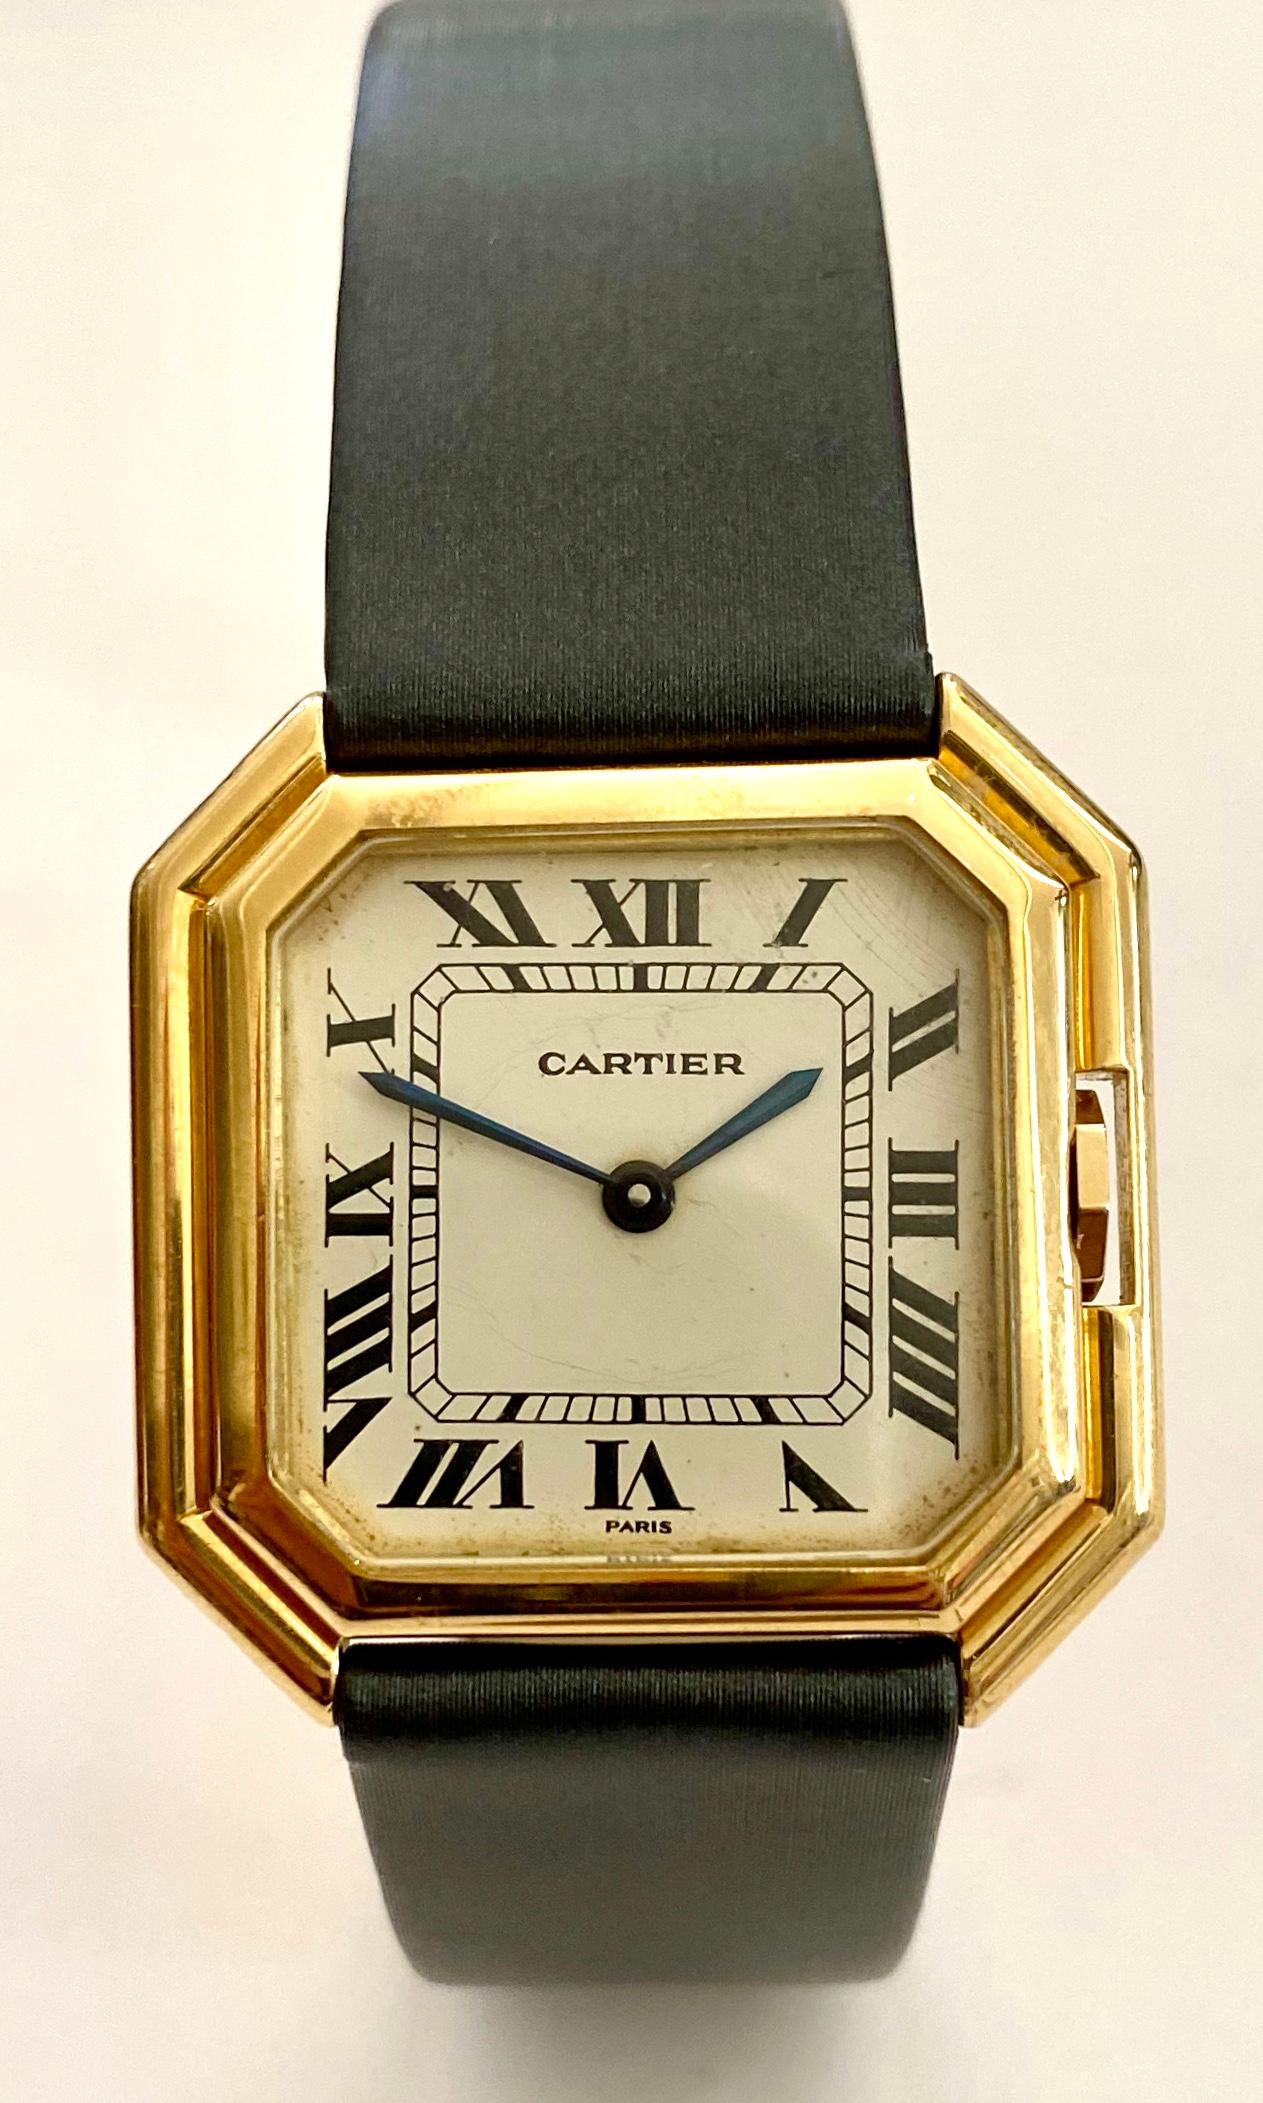 One (1) 18K. Yellow Gold Cartier wirstwatch with a leather strap and a 18K. yellow Gold Buccle
Model: Cienture, automatic ref, nr: 178011 
Auitomatic movement from Eta (swiss)
Year of production ca 1975 (this is watch nr 263 from this